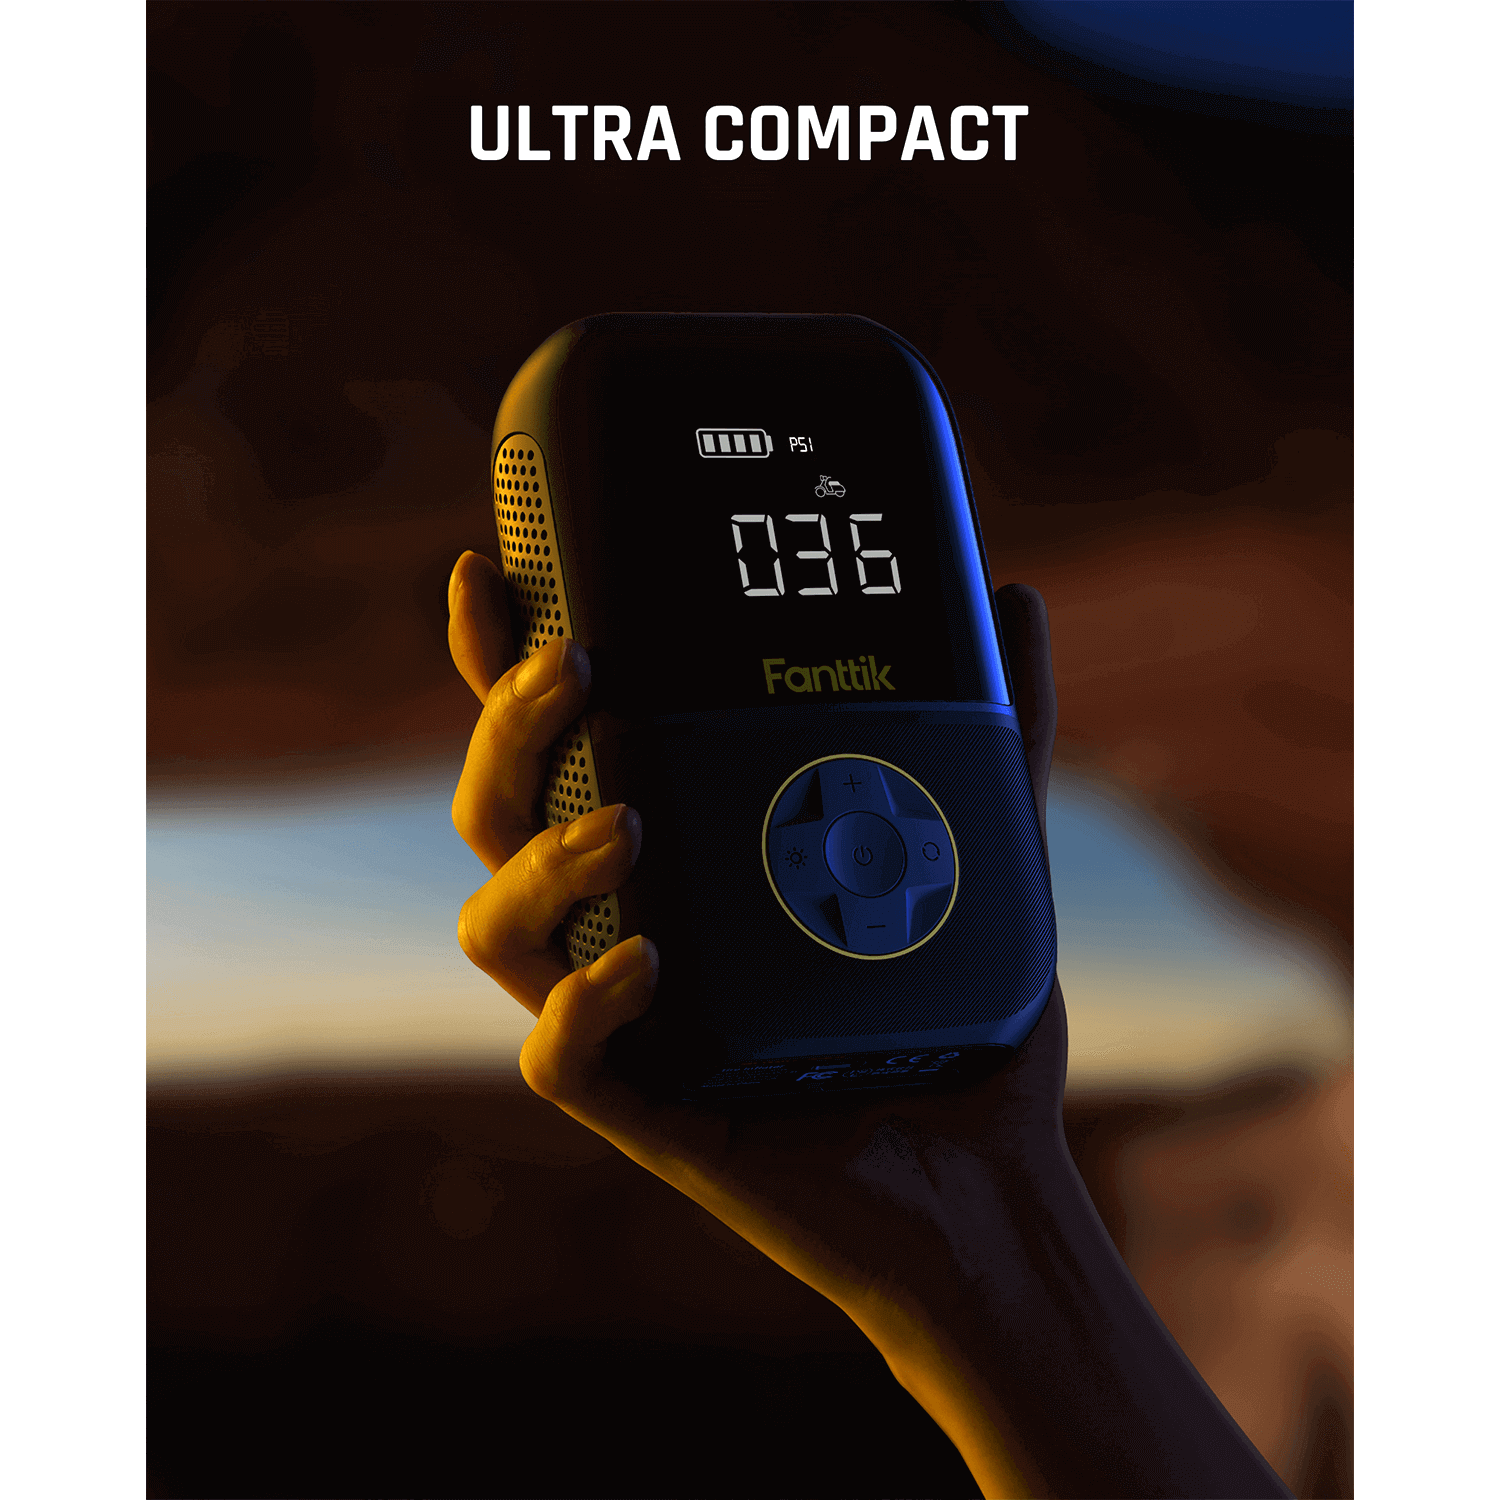 Weighing only 1.2 pounds(544g), the ultra-lightweight X8 can be easily held in one hand while in use. The compact and lightweight design is easy storage fit in your pocket, bicycle rack, car or backpack.